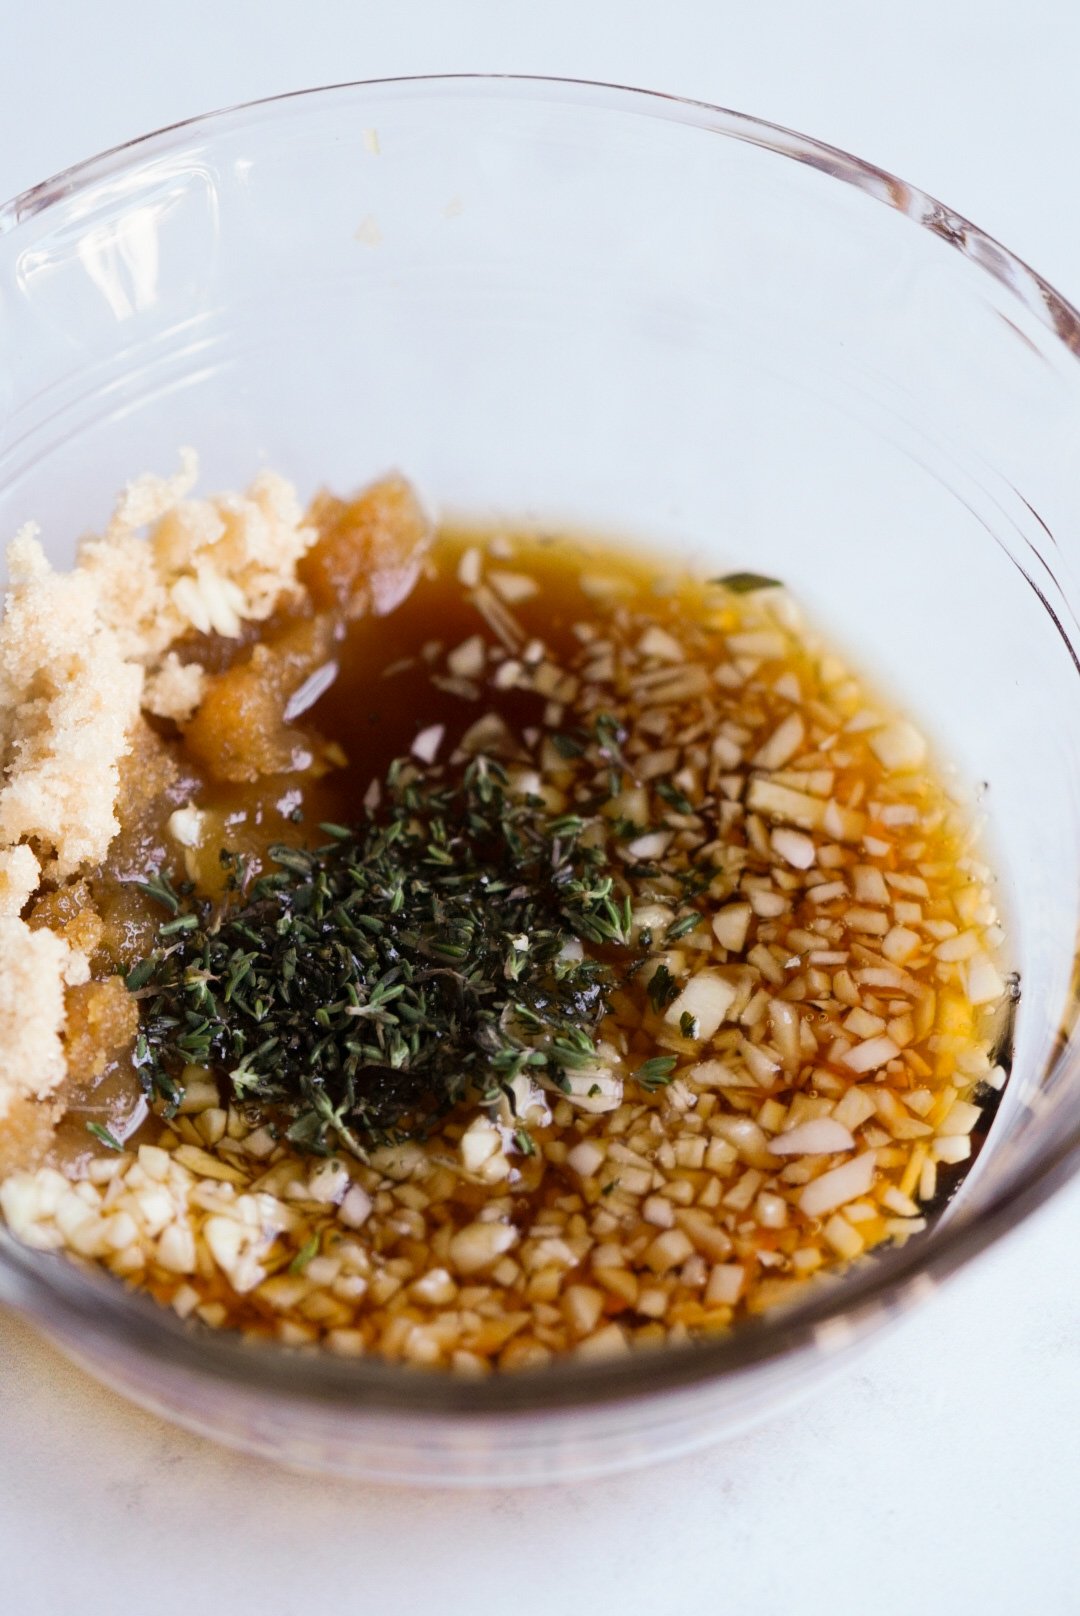 maple syrup, brown sugar, thyme, and garlic in a small bowl